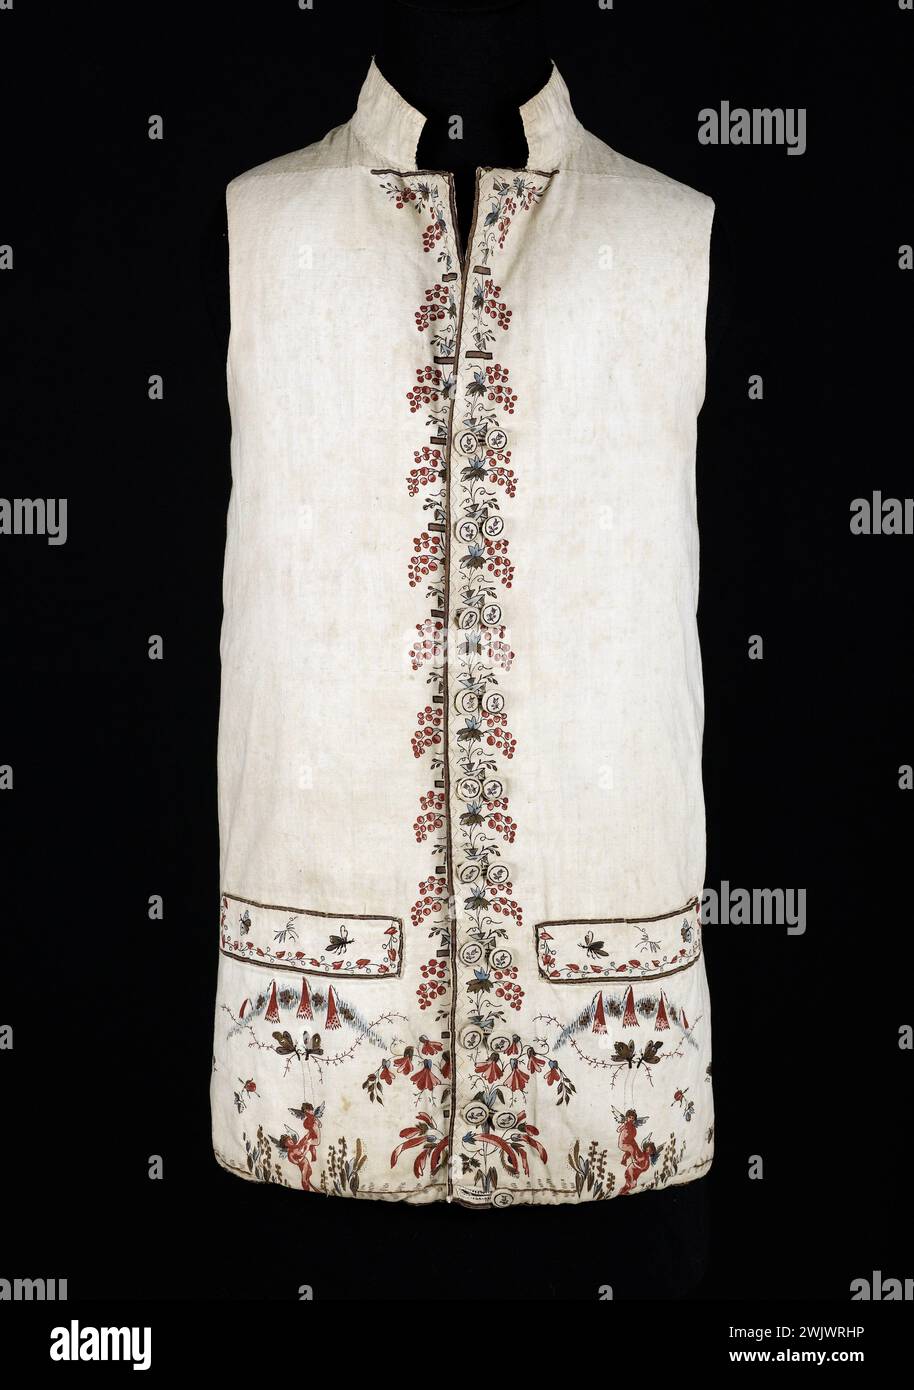 Vest. Canvas, cotton printed with wooden board, five colors, wooden buttons covered with printed fabric, 1785-1795. Galliera, fashion museum of the city of Paris. 53916-4 Cotton, flower, vest, man, print, male mode, canvas, 18th century Stock Photo